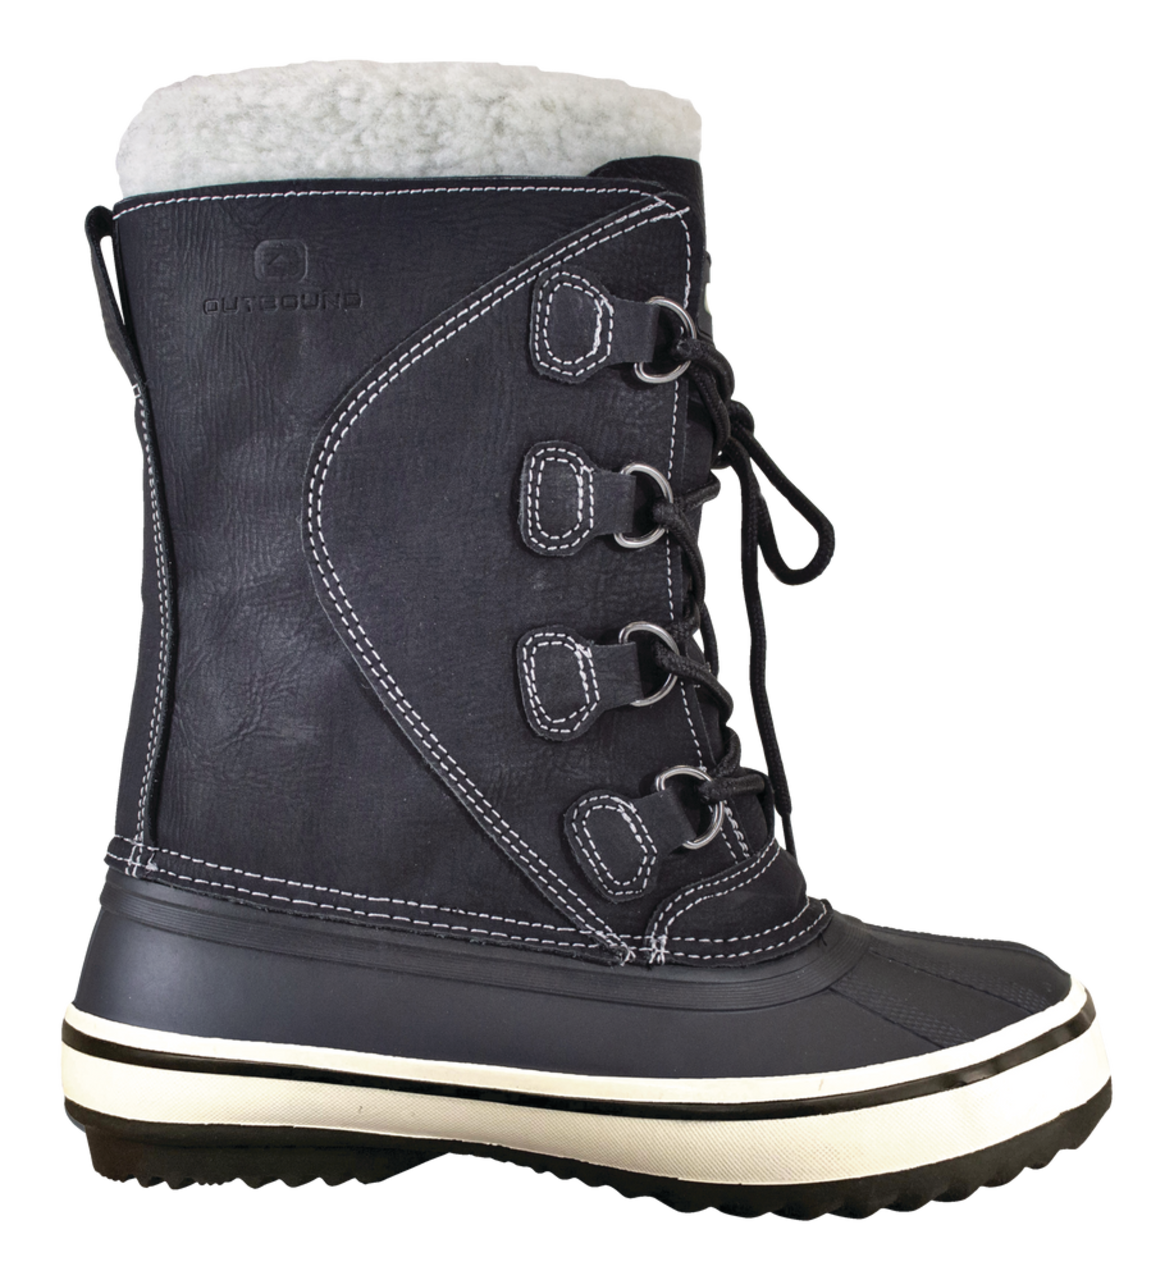 Outbound Women's Cascade Insulated Water-Resistant Winter Snow Boots  Sherpa/Felt Lining